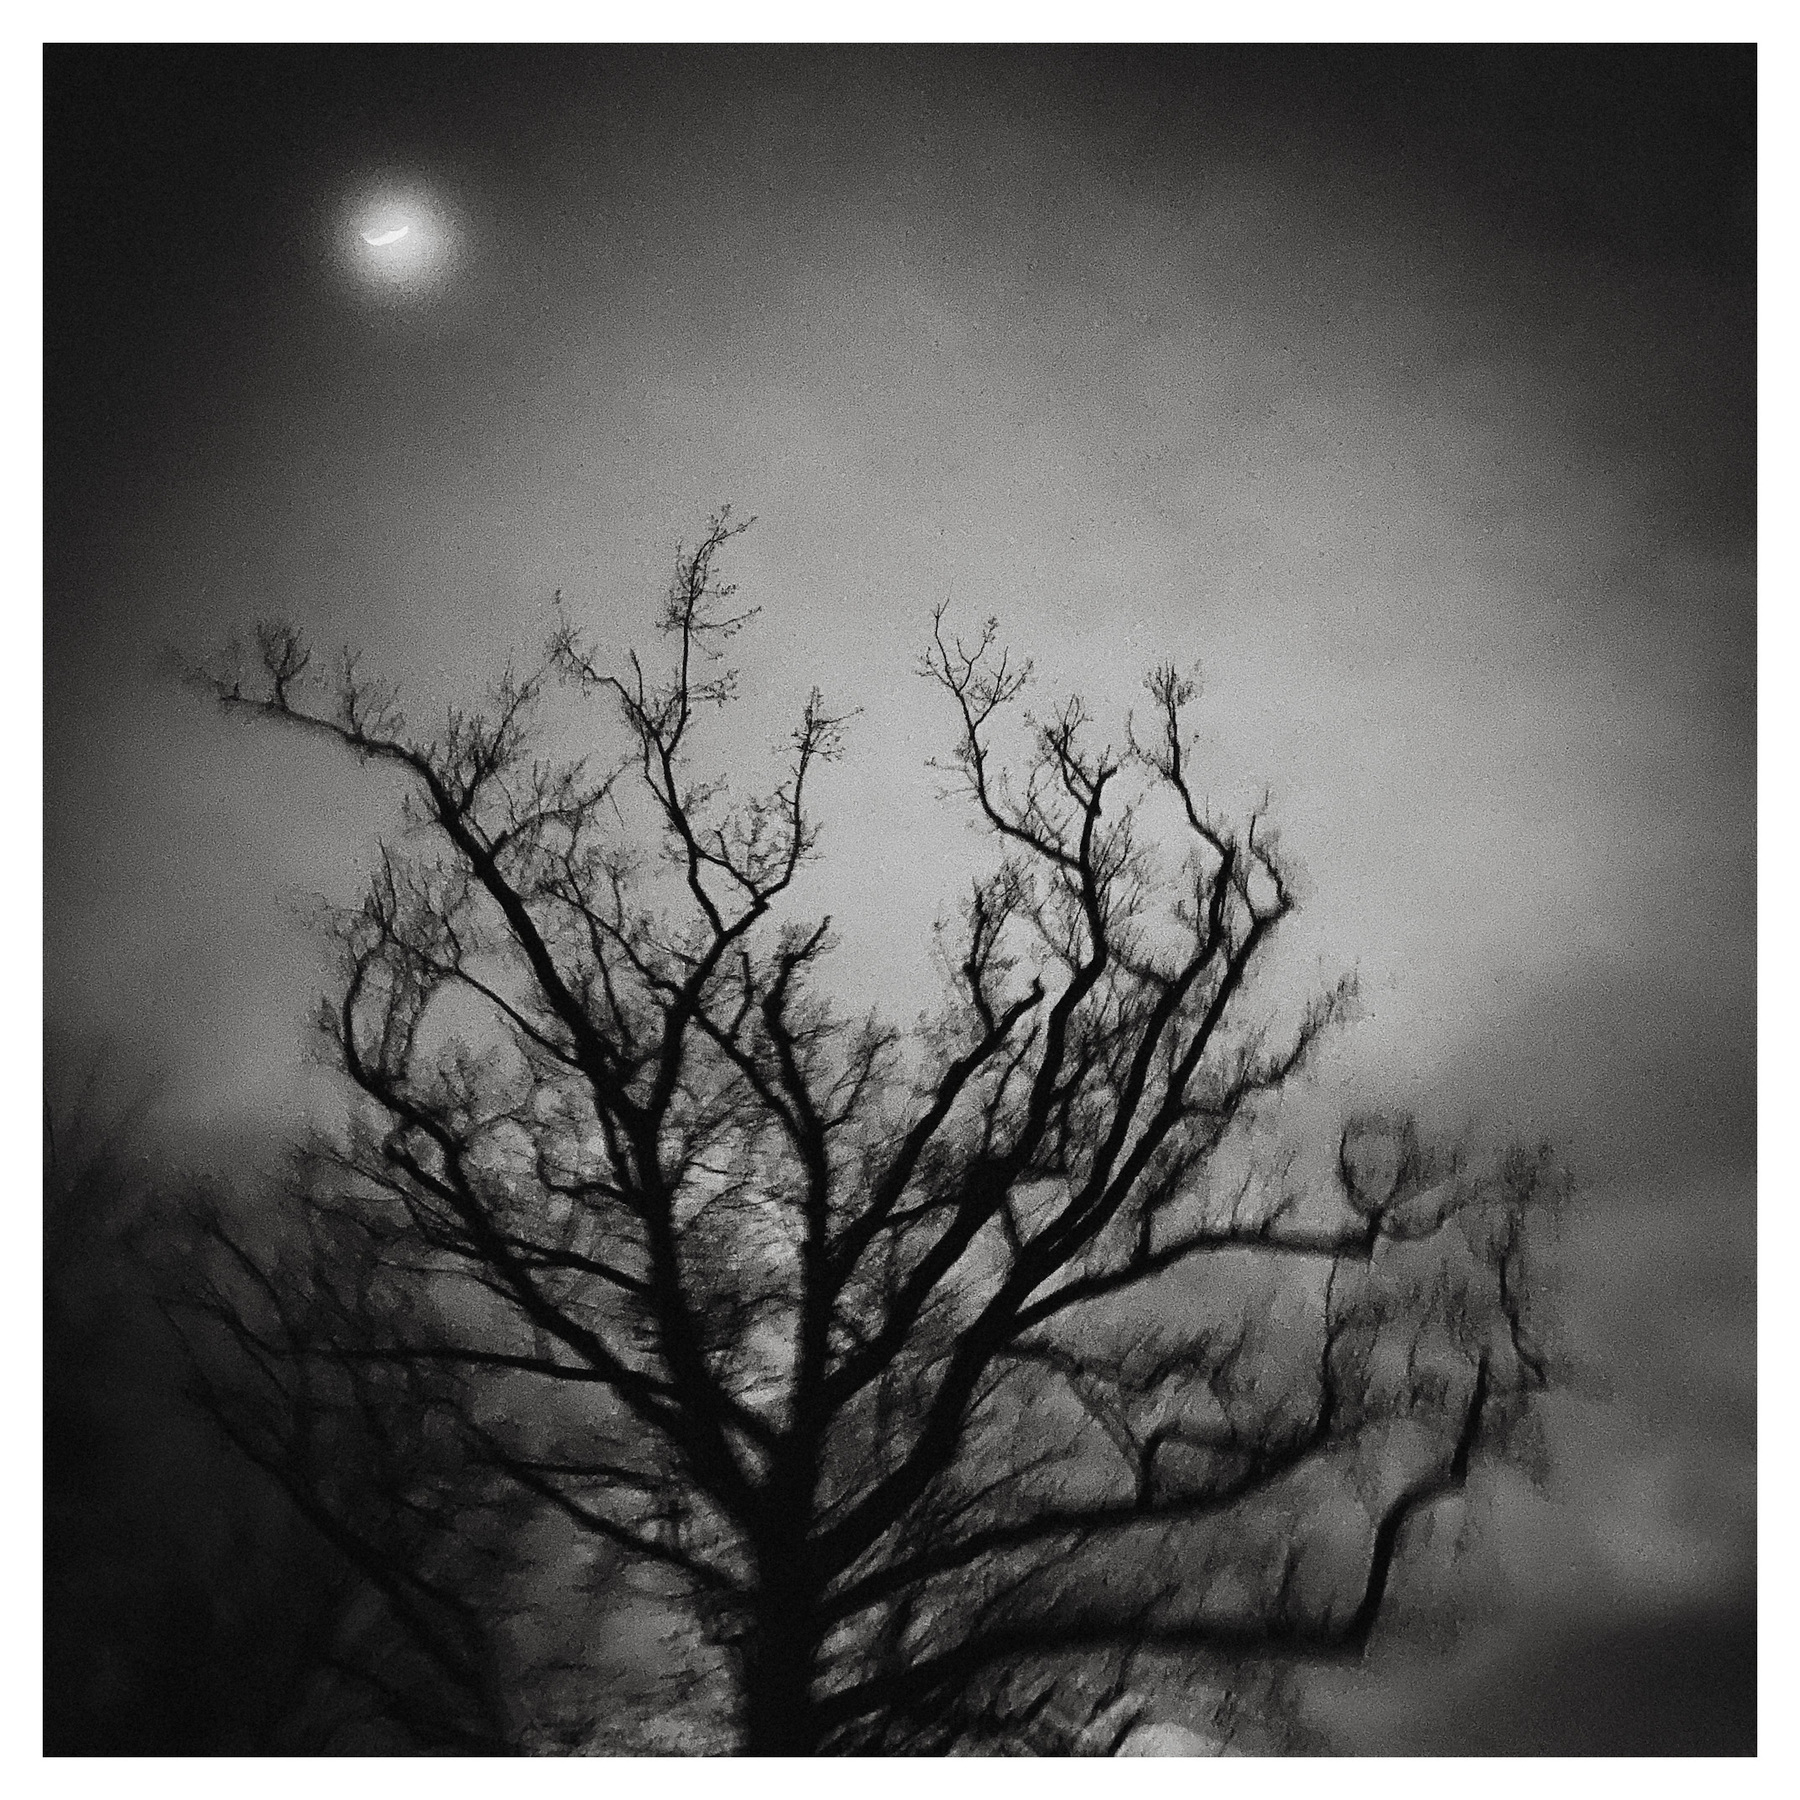 Moody, dark silhouet of a tree against the evening sky.